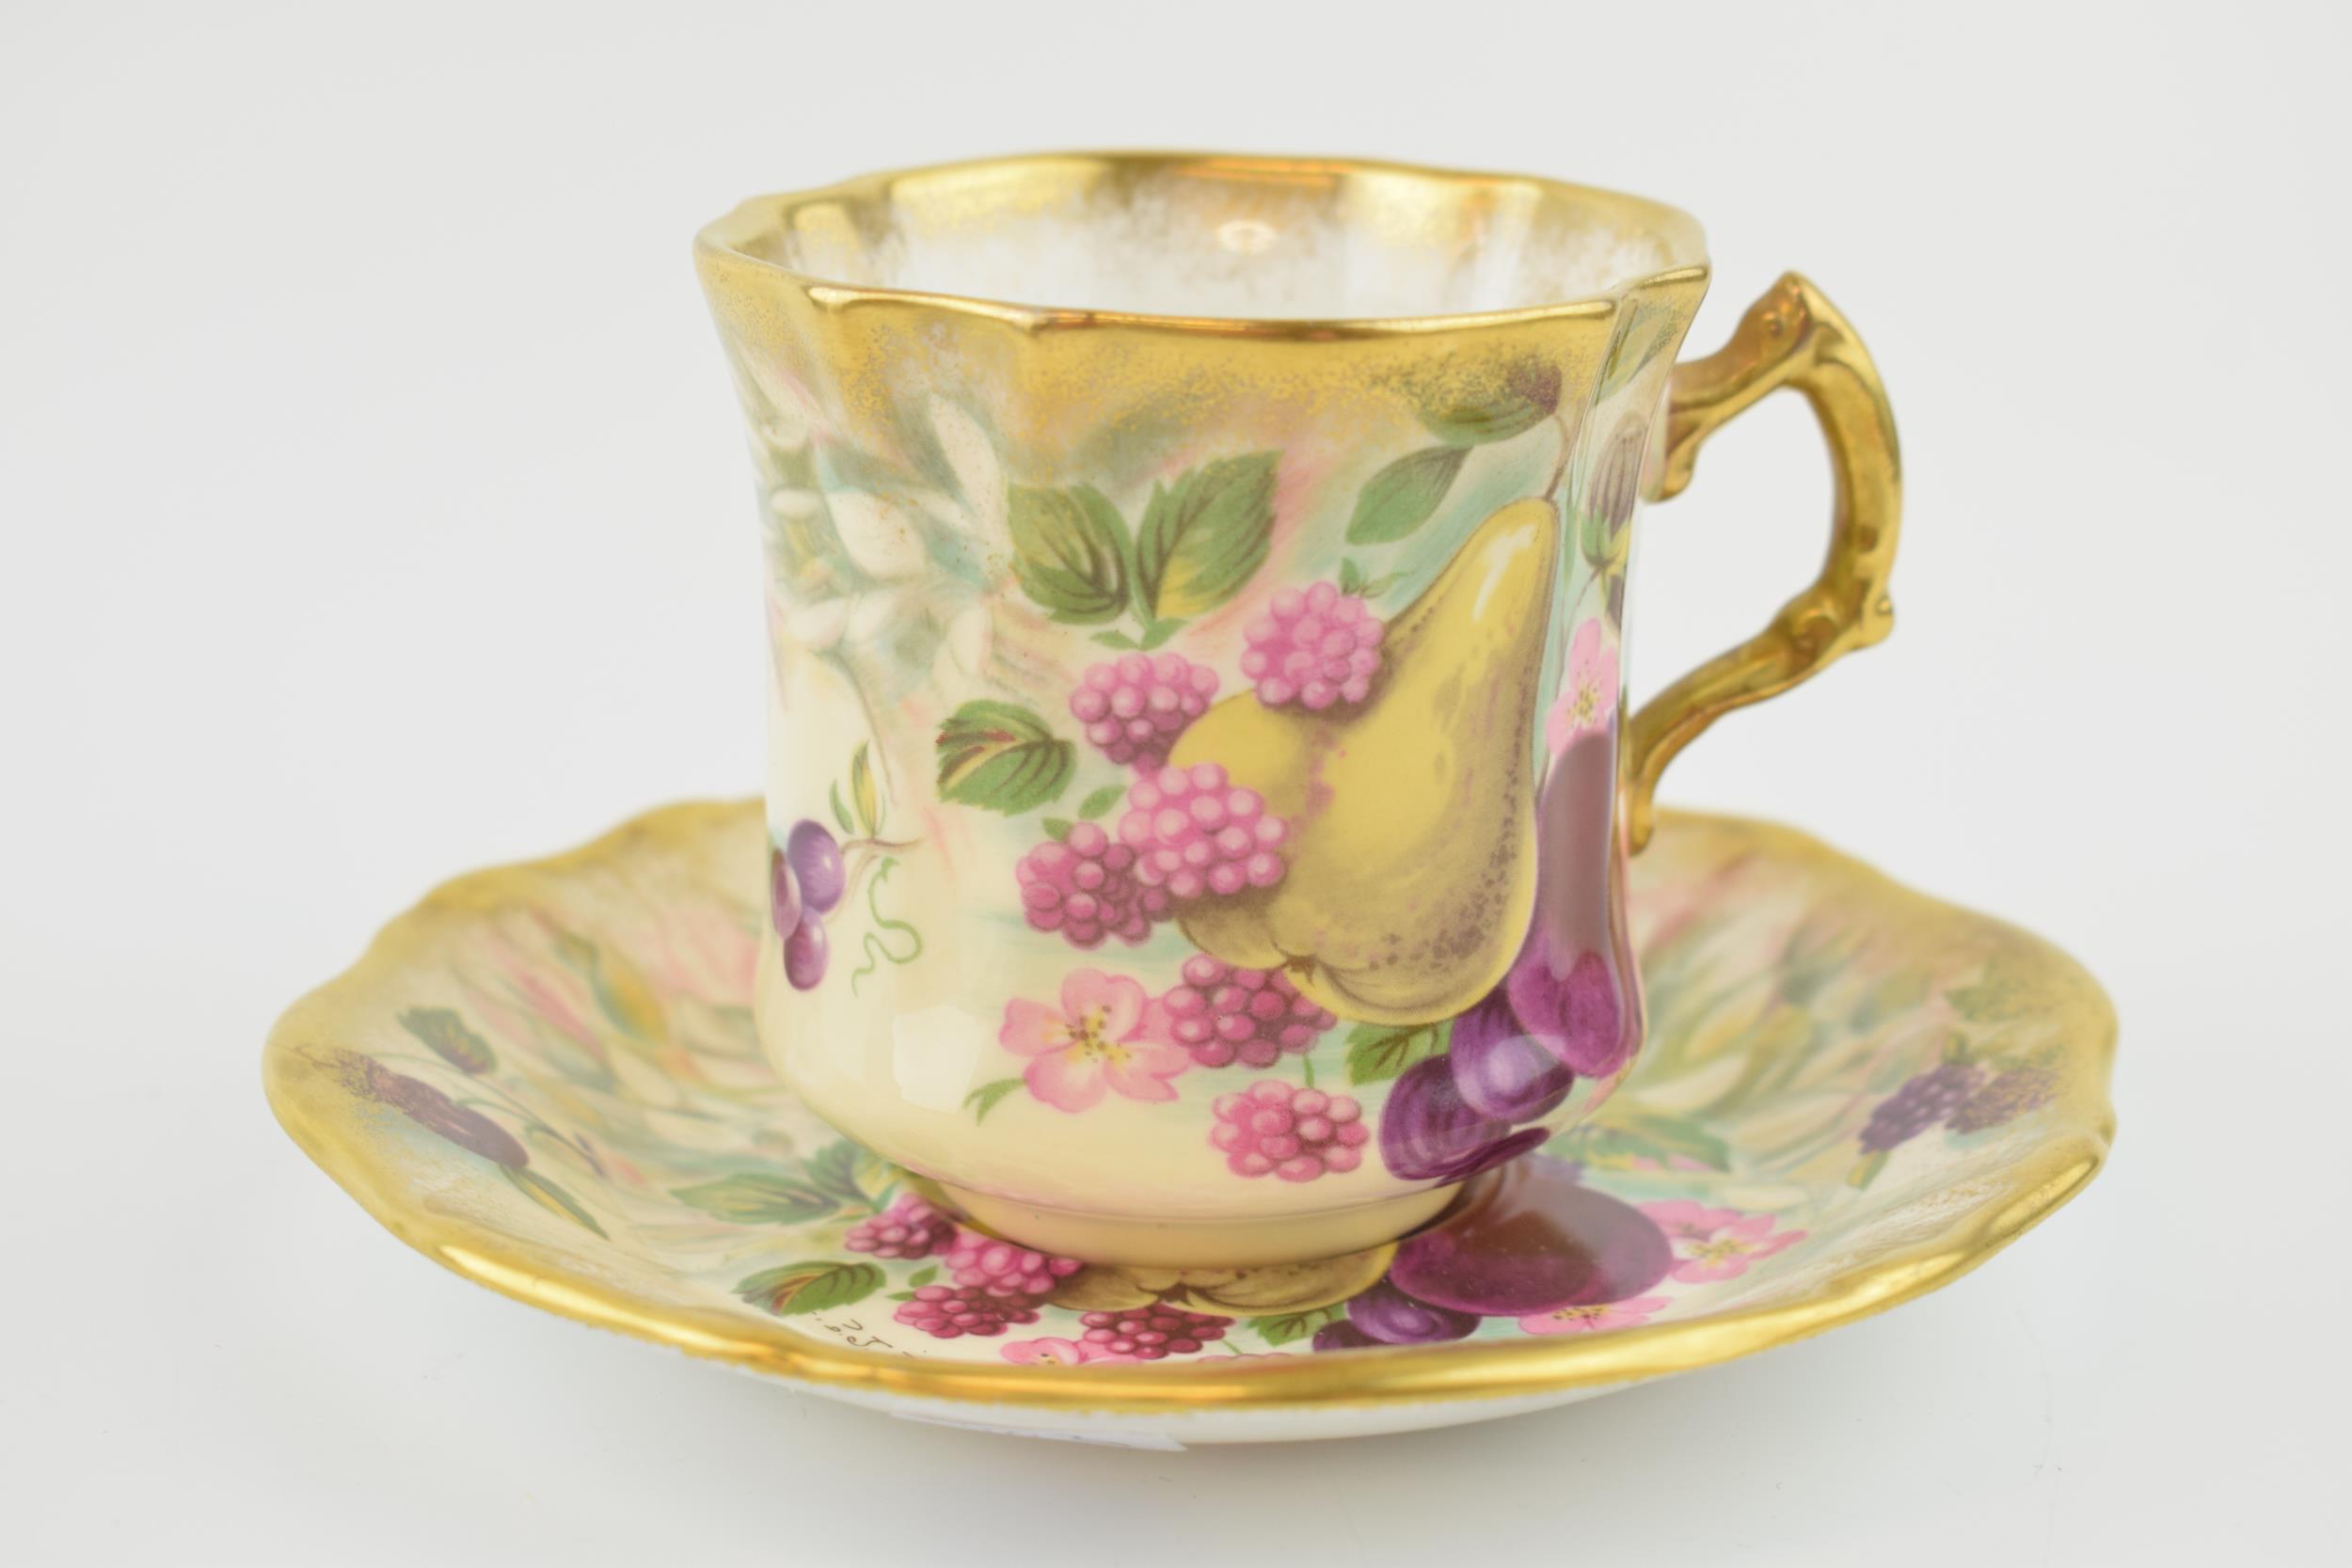 Hammersley bone china fruit pattern cup and saucer 'R J Billings' (2). In good condition with no - Image 2 of 5